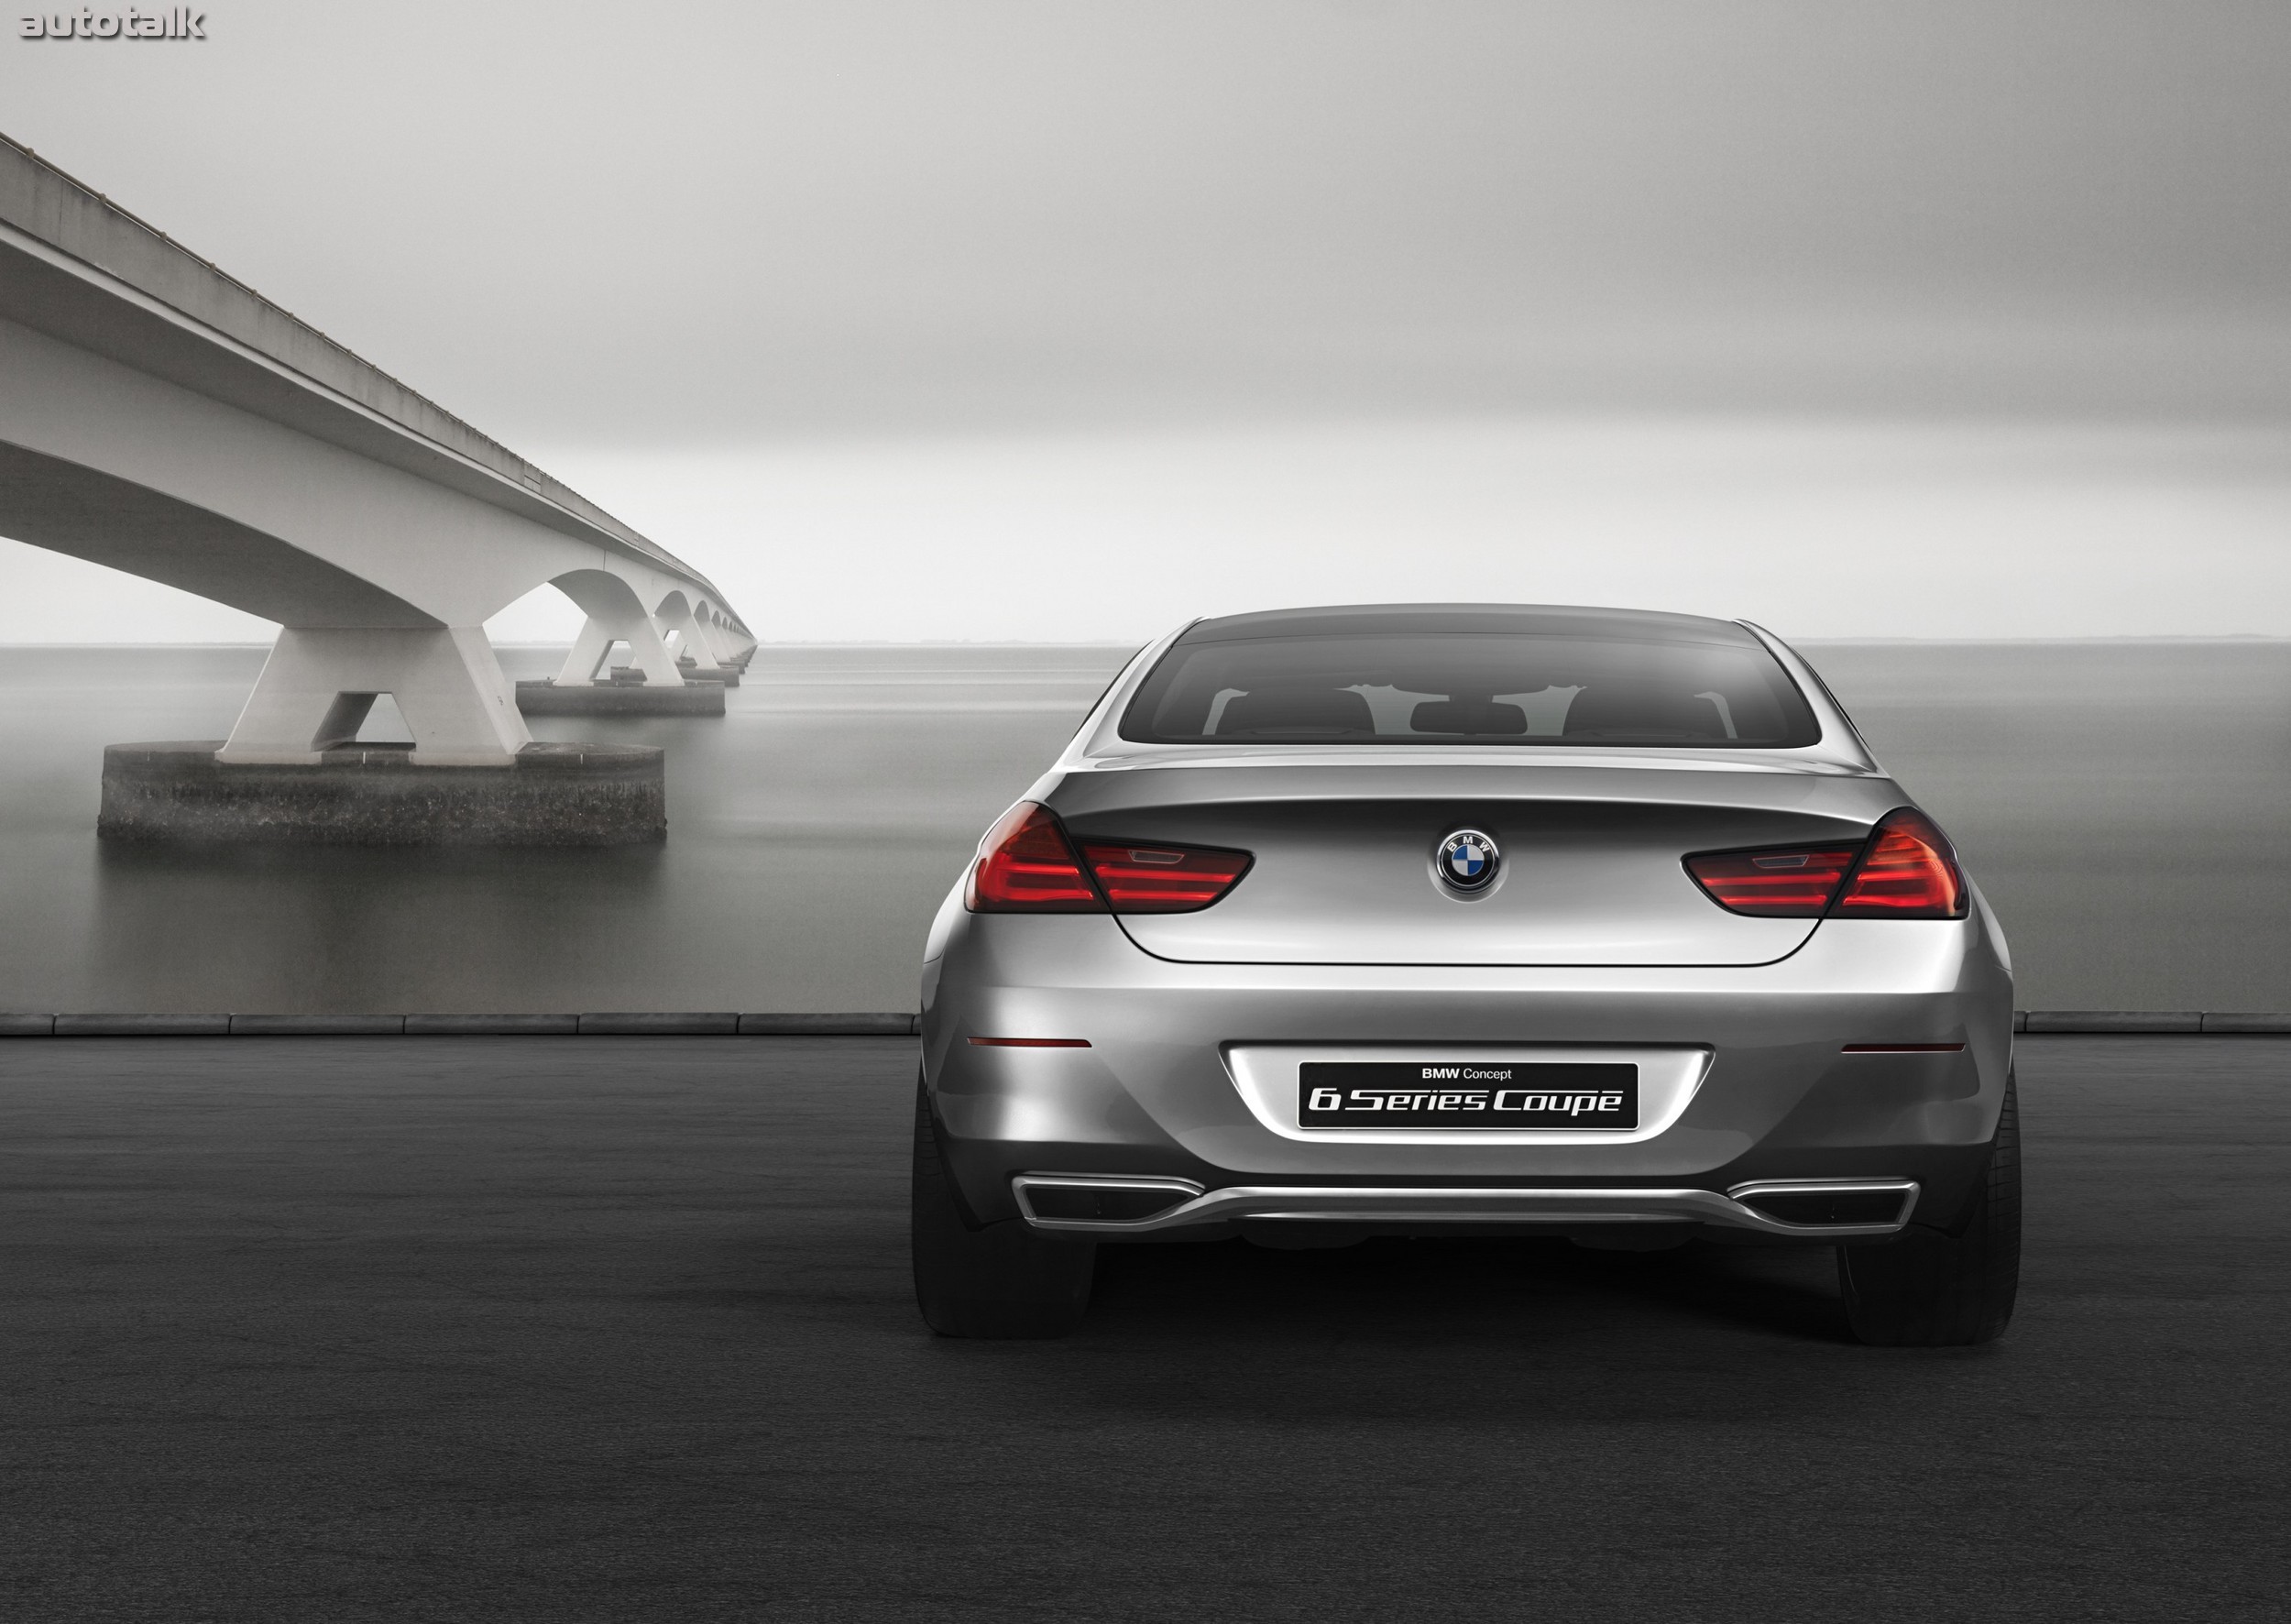 BMW Concept 6 Series Coupe